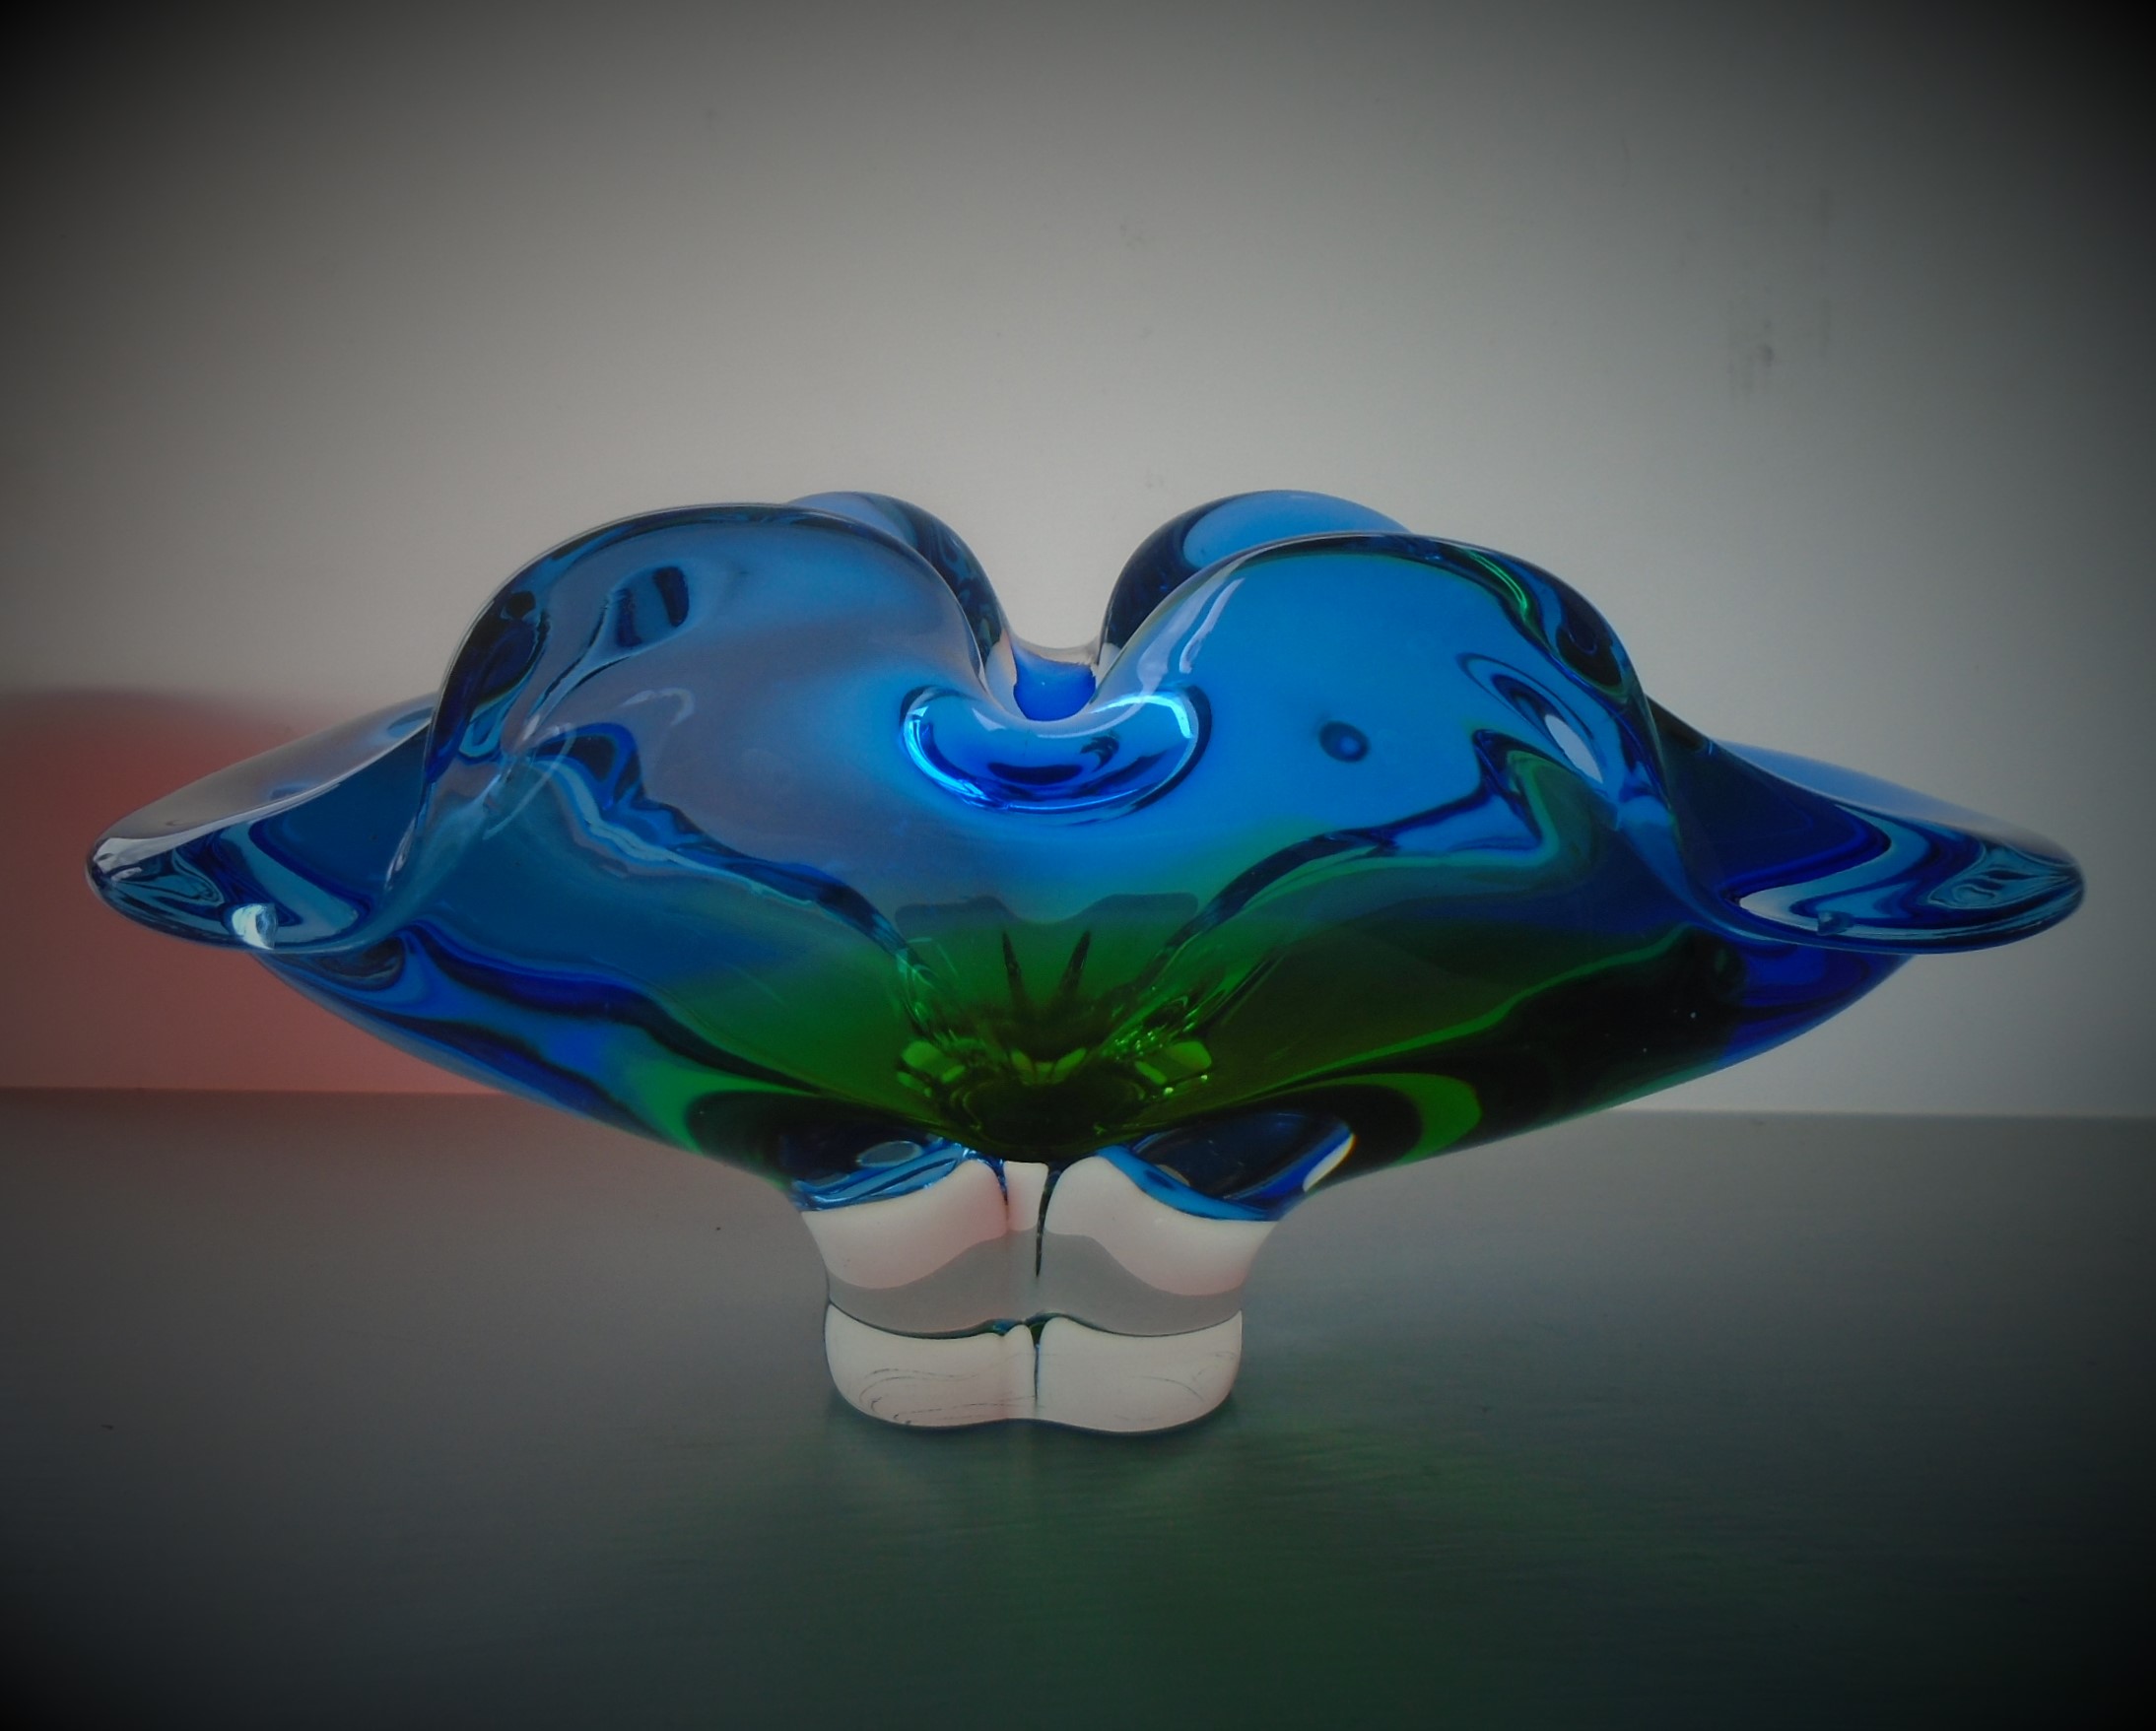 Offered for sale is what I believe to be a stunning   60S VINTAGE  BLUE  AND  GREEN GLASS FROM CZECH MAKER CHRIBSKA AND POSSIBLE DESIGNED BY JOSEPH HOSPODKA 